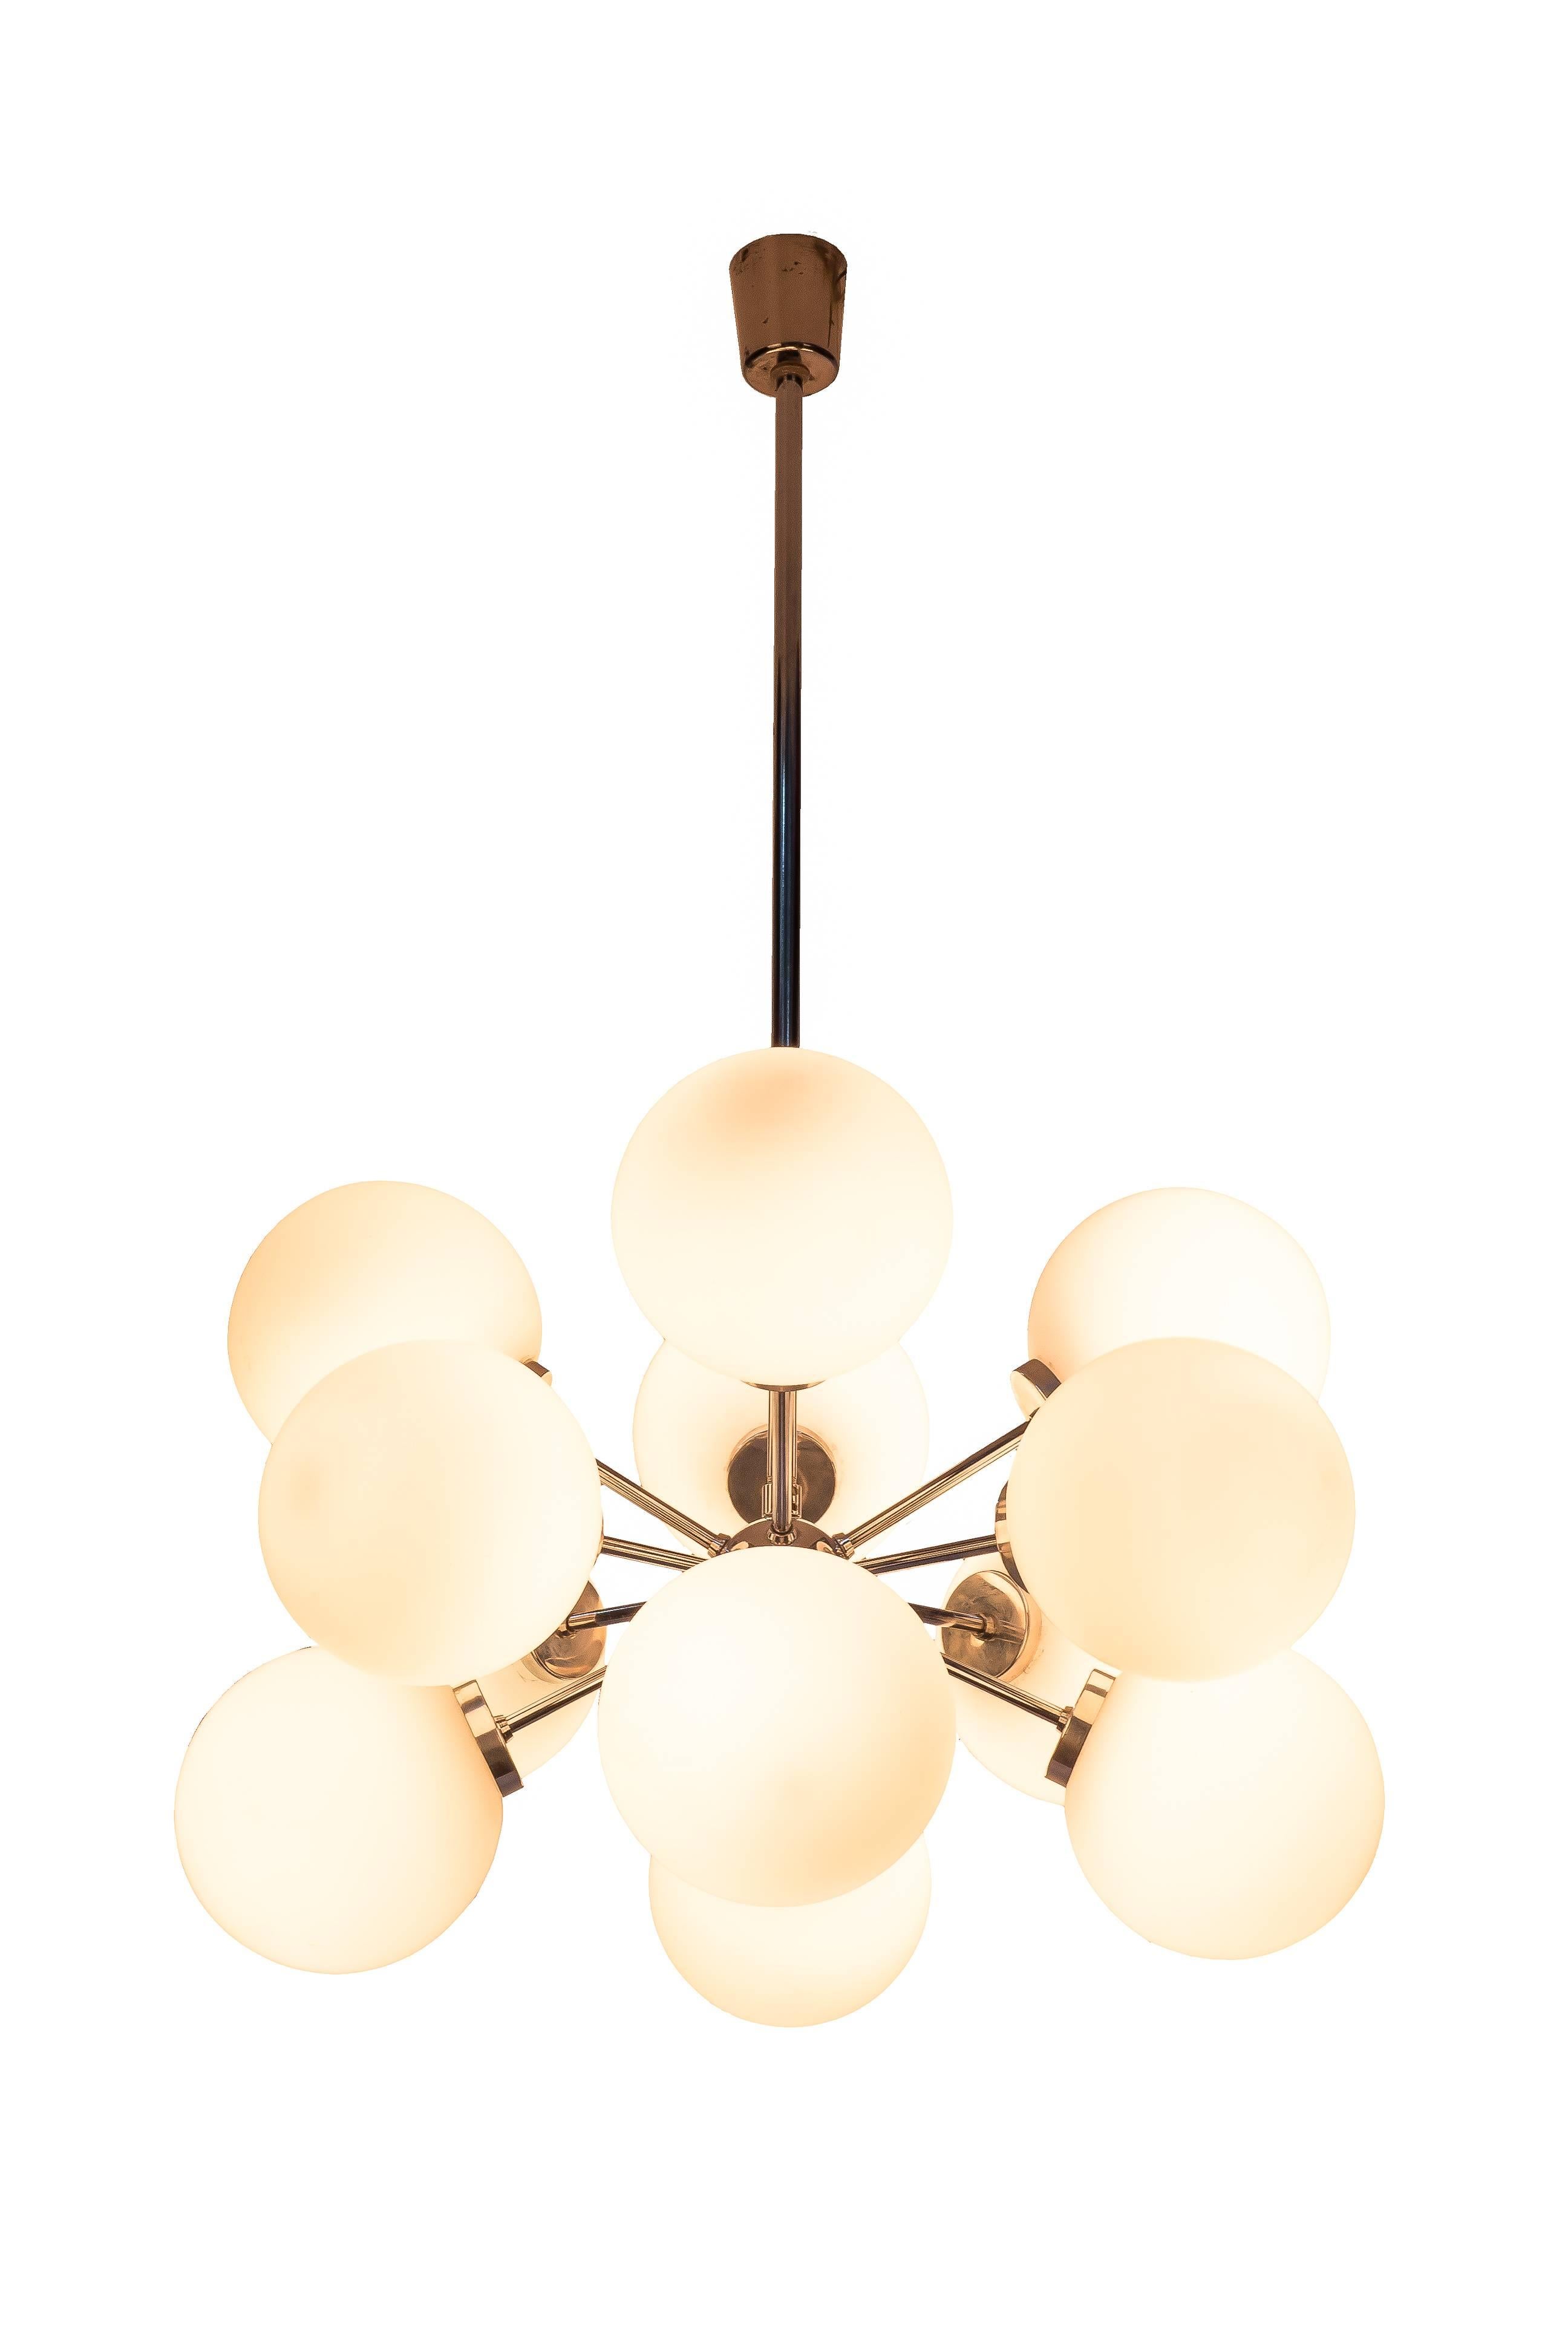 This gorgeous Mid-Century Modernist chandelier was designed by Richard Essig. It features a chrome base with twelve opal glass globes creating a cluster form design.

Made in Germany, circa 1965

Measures: 24